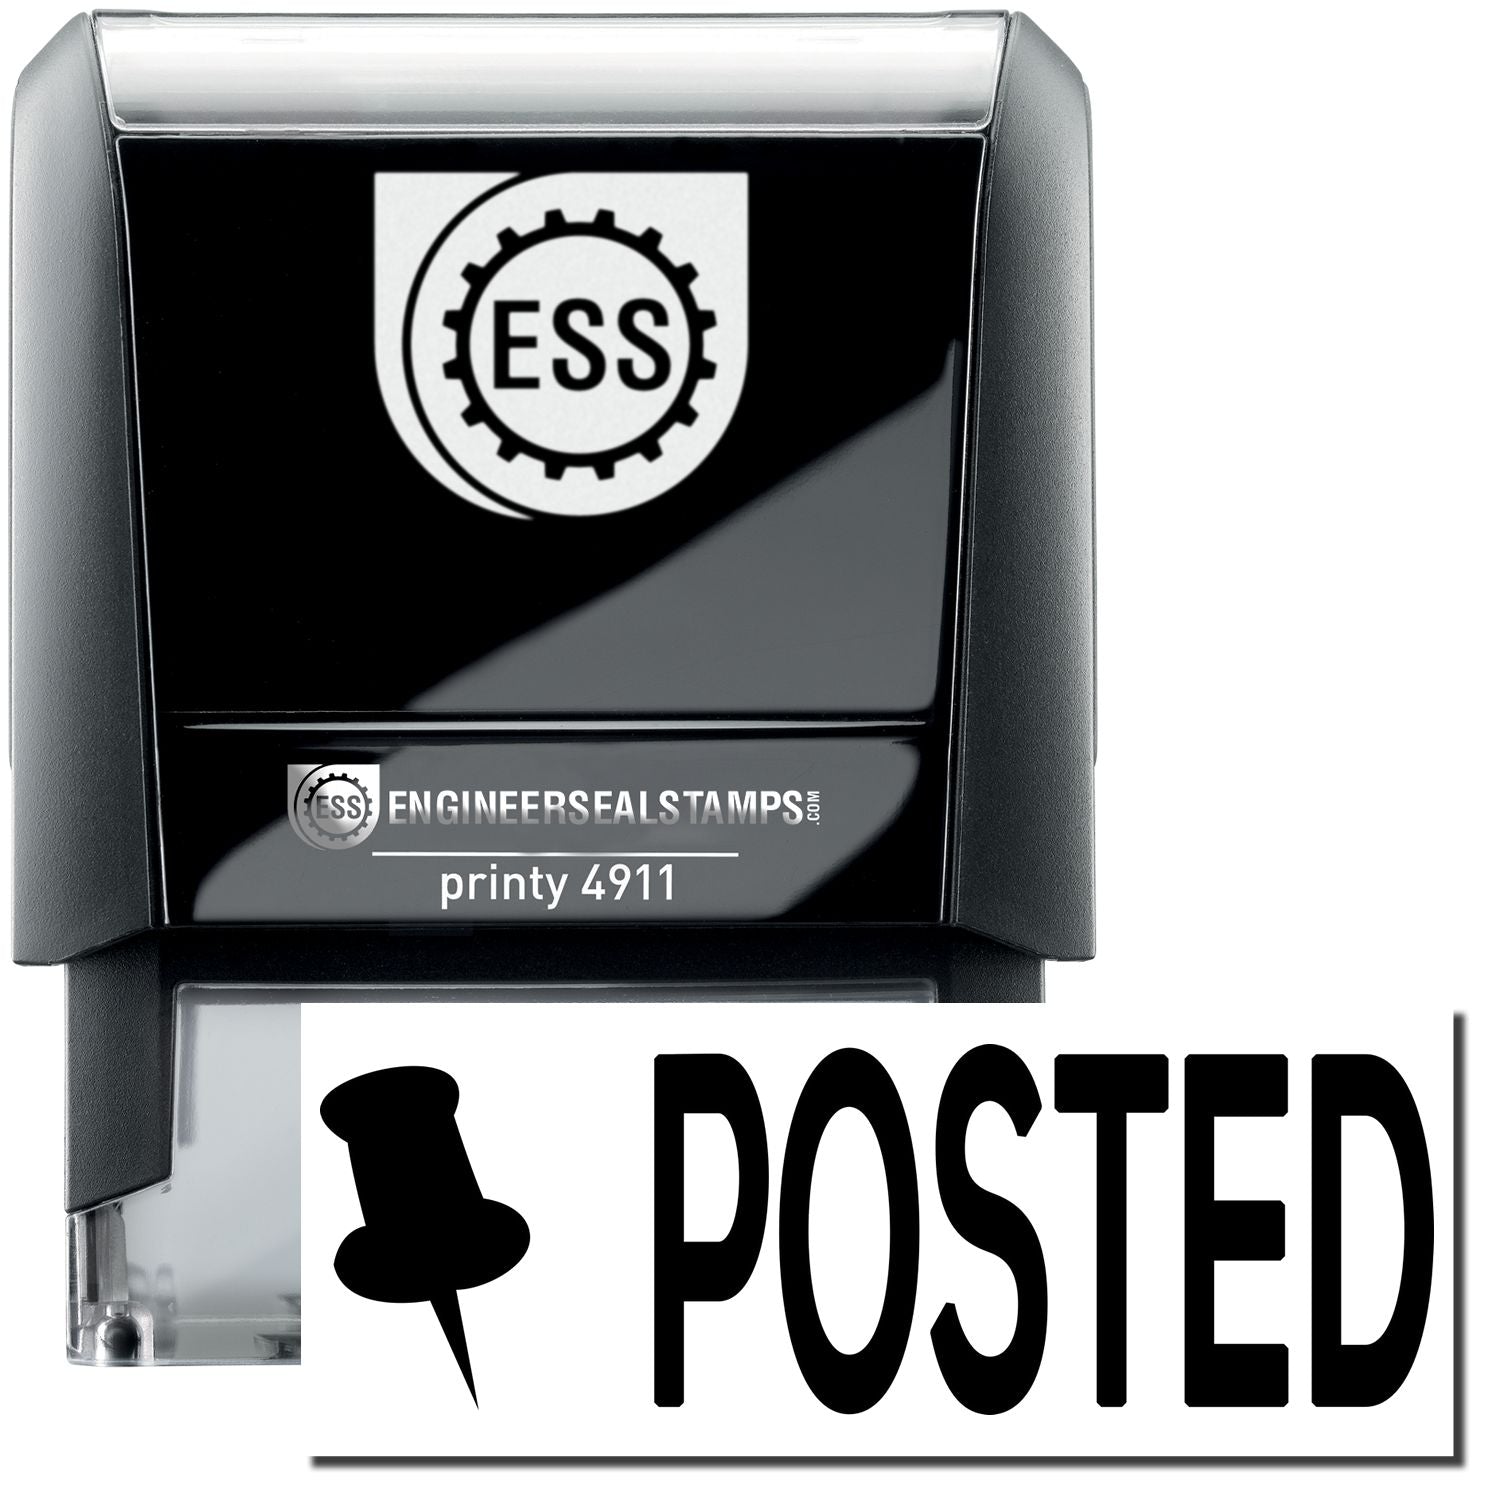 A self-inking stamp with a stamped image showing how the text "POSTED" in bold font and a thumbtack image on the left is displayed after stamping.